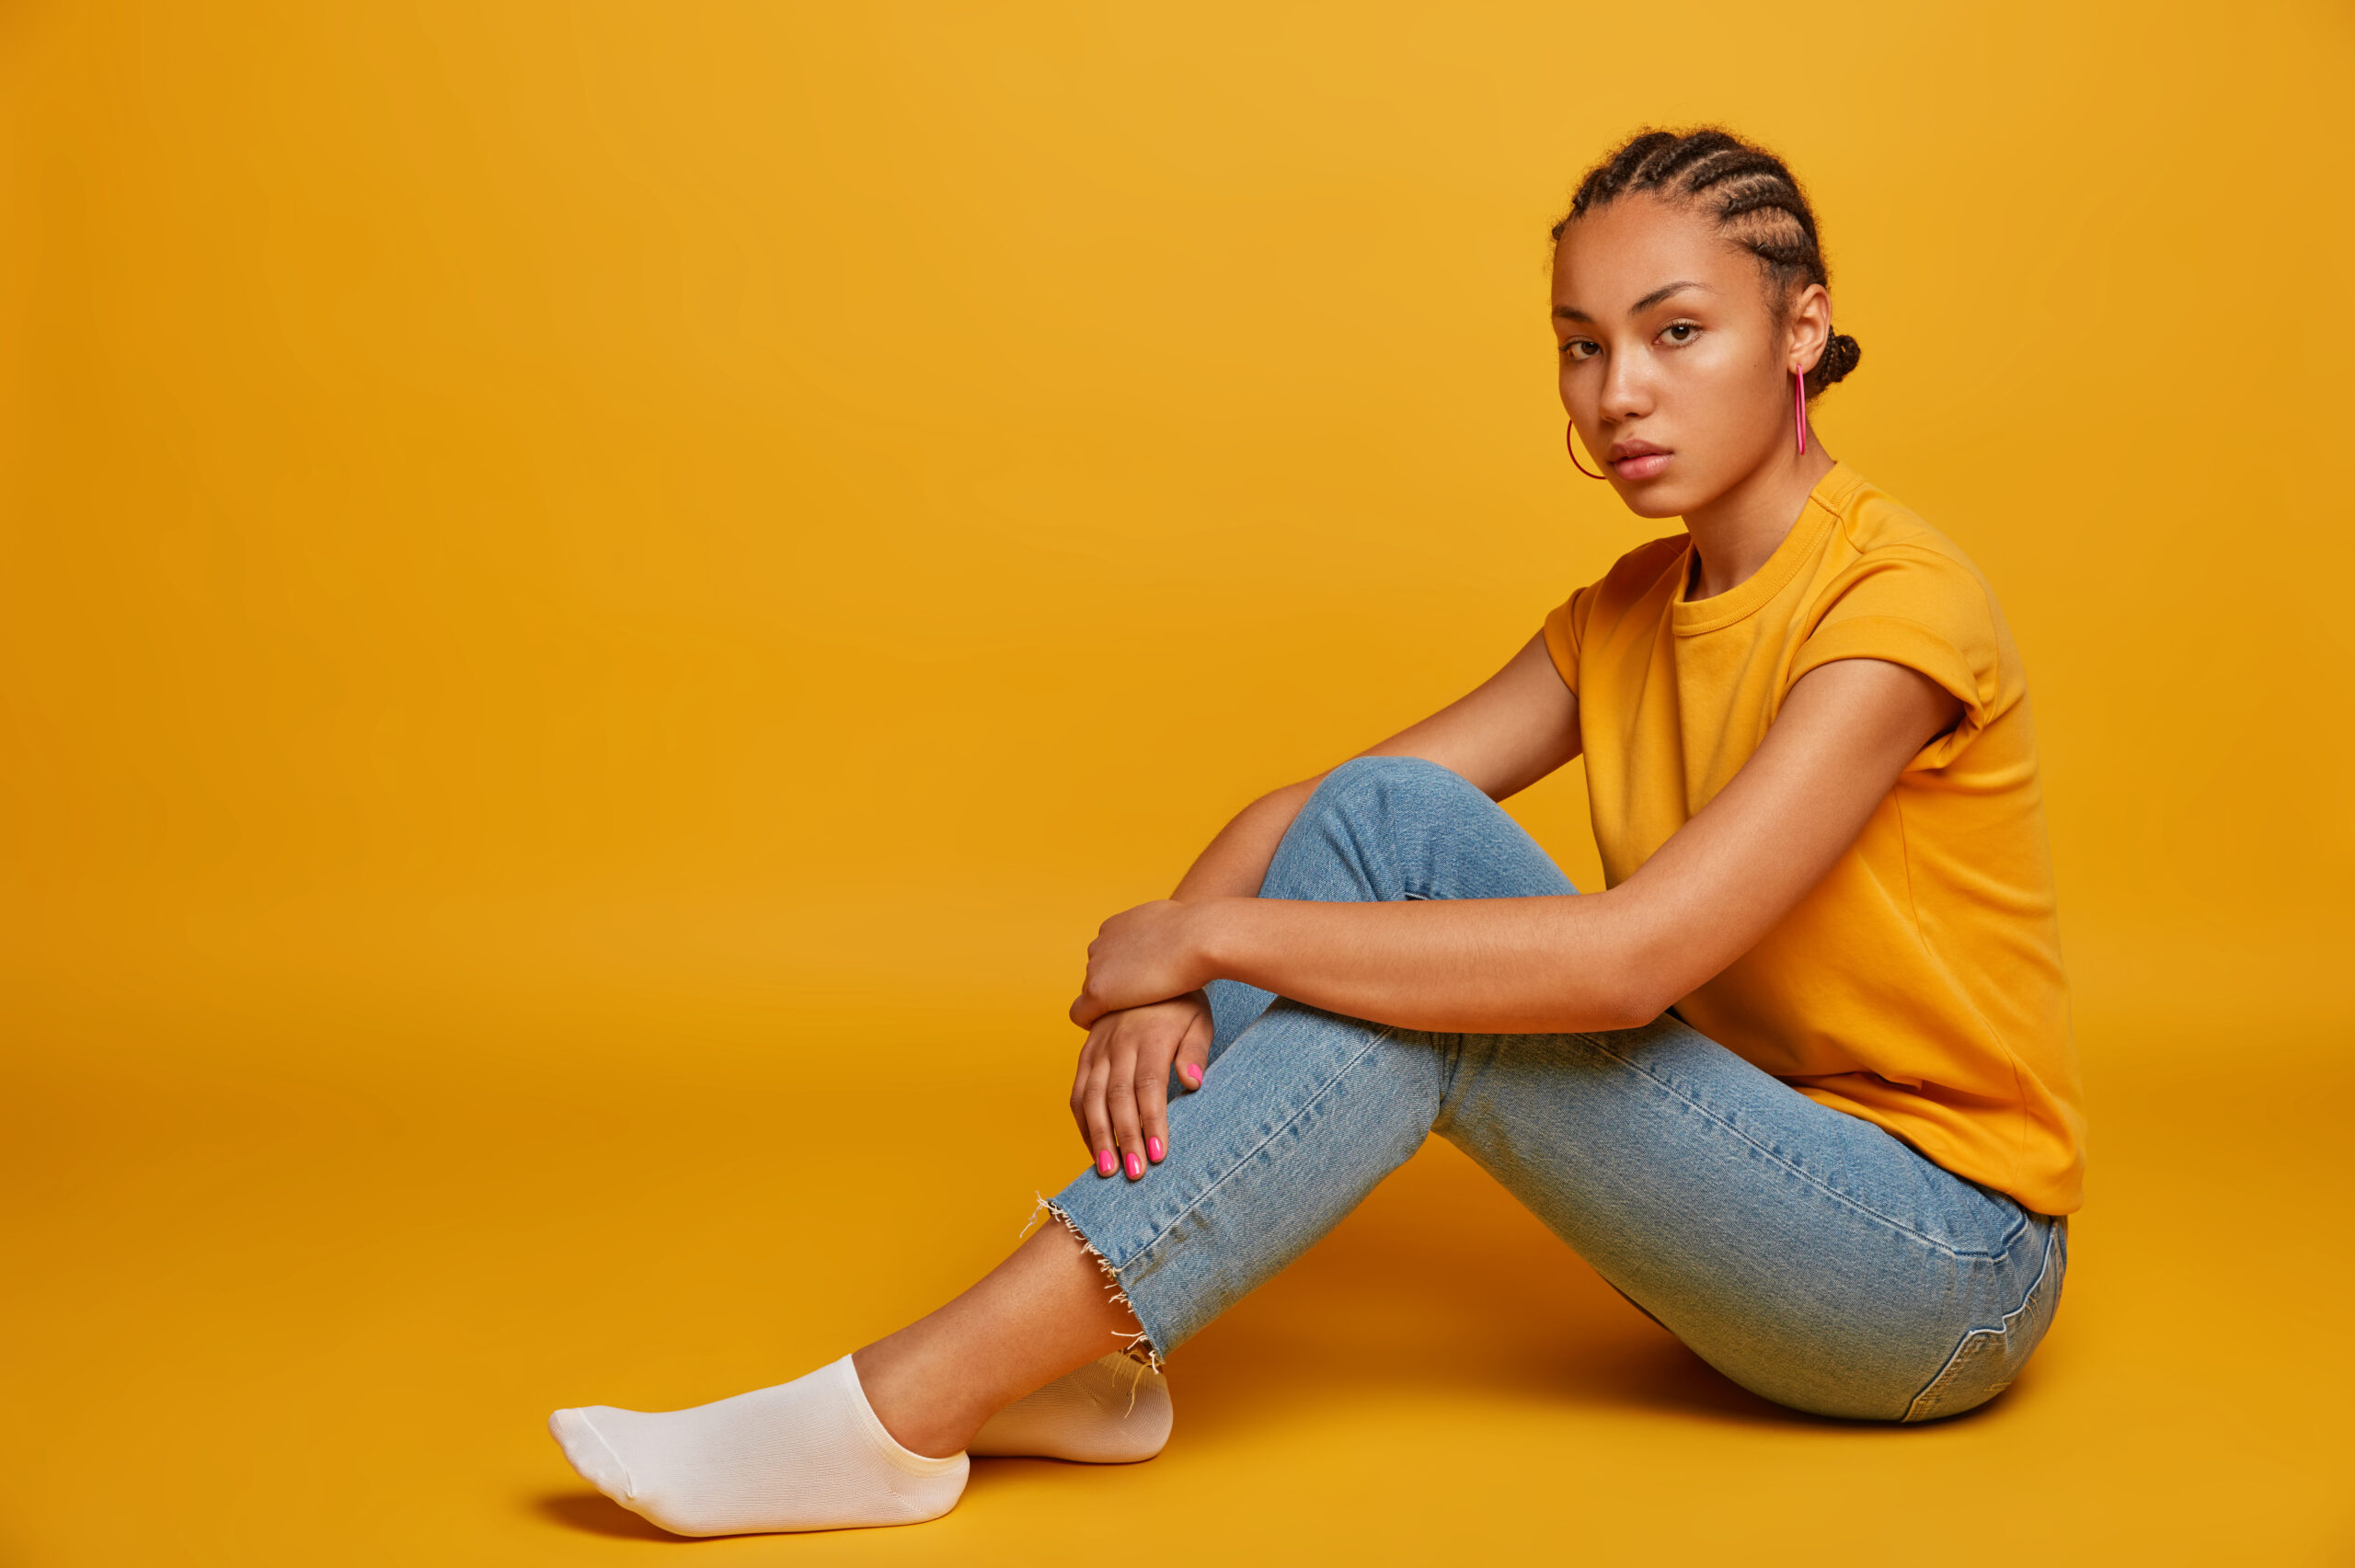 Photo Of Calm Relaxed Woman Sits Sideways Against Yellow Background, Has Cornrows Braids, Wears Casual T Shirt And Jeans, Looks Seriously At Camera, Feels Relaxed. Copy Space For Your Advertisement